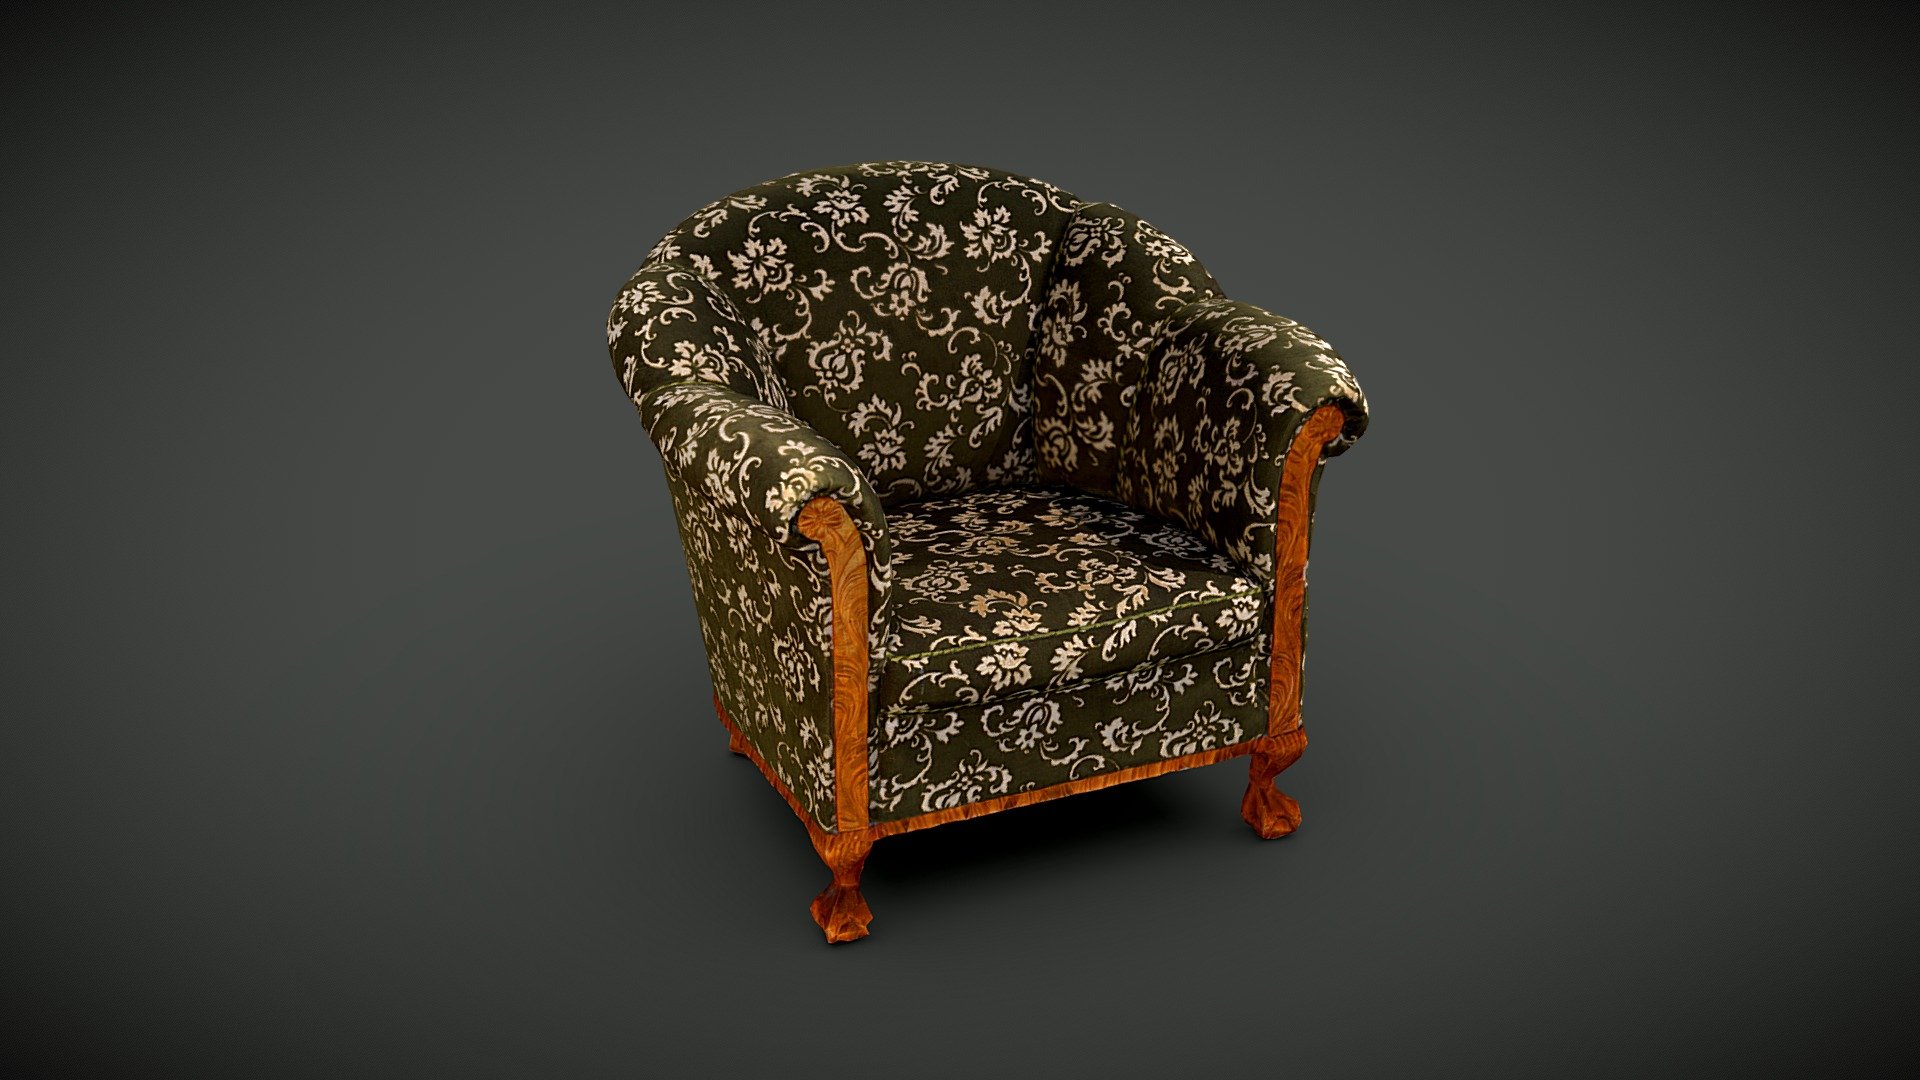 Photos taken with A7Riv + Tamron 28-200mm

Processed with Metashape + Blender + Instant meshes - Green armchair - Download Free 3D model by Lassi Kaukonen (@thesidekick) 3d model